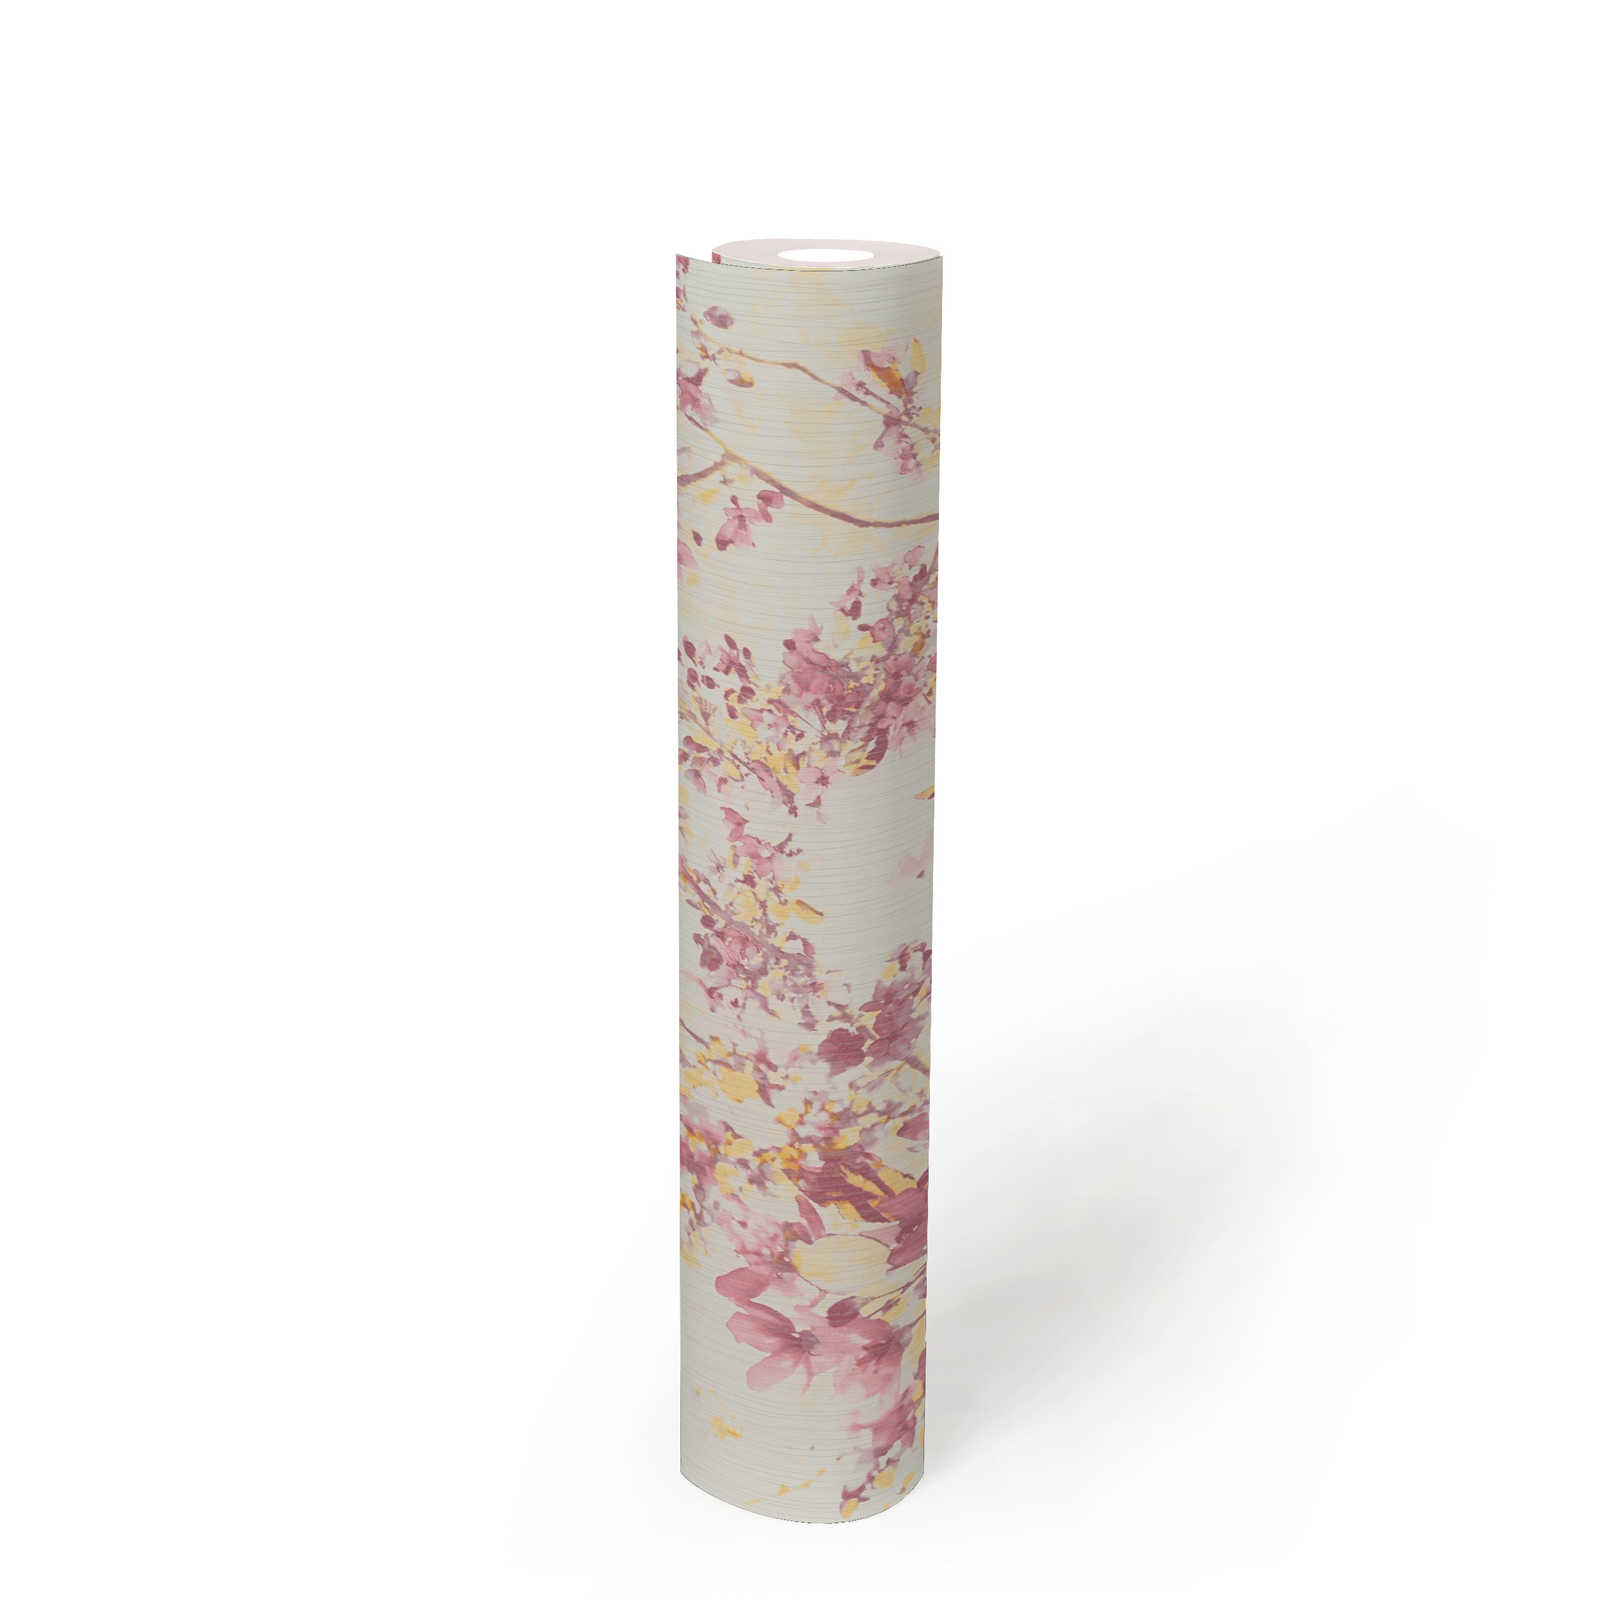             Flowers non-woven wallpaper with floral motif - pink, yellow
        